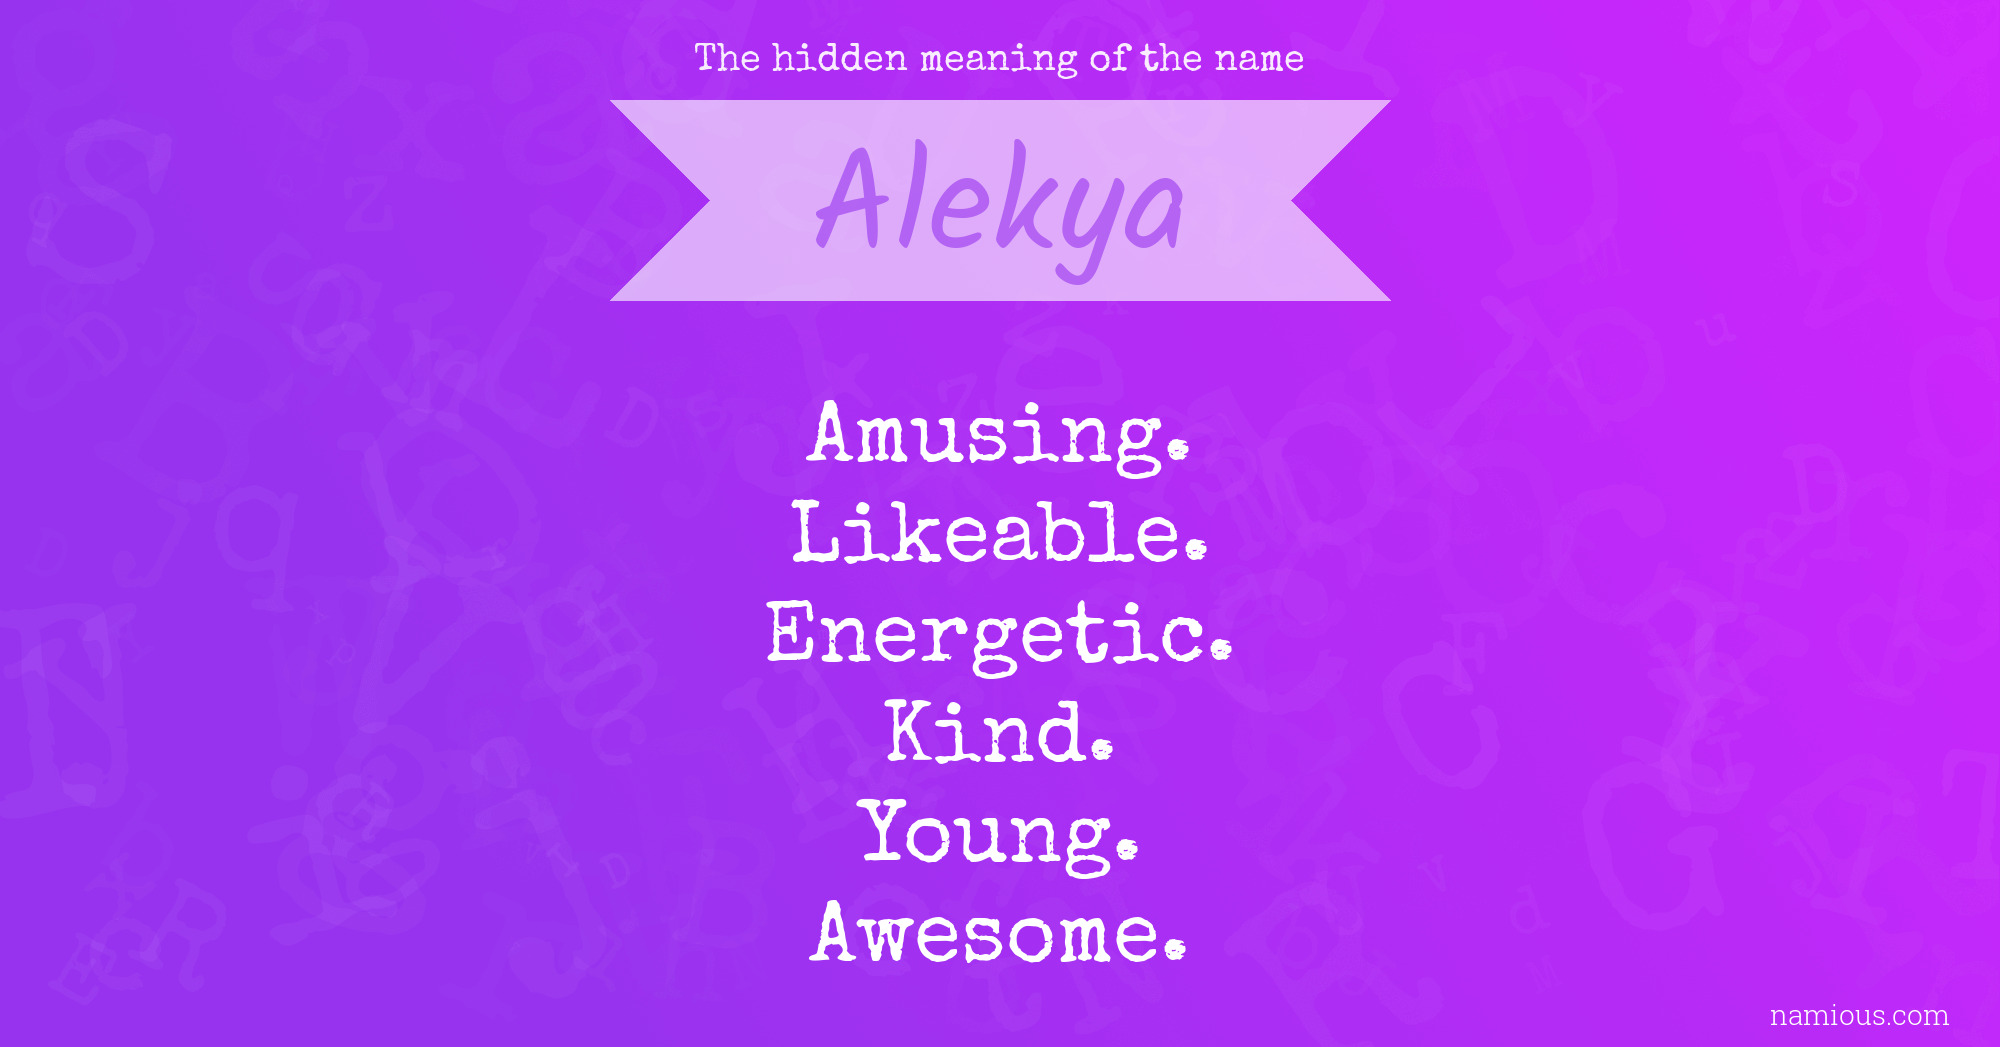 The hidden meaning of the name Alekya